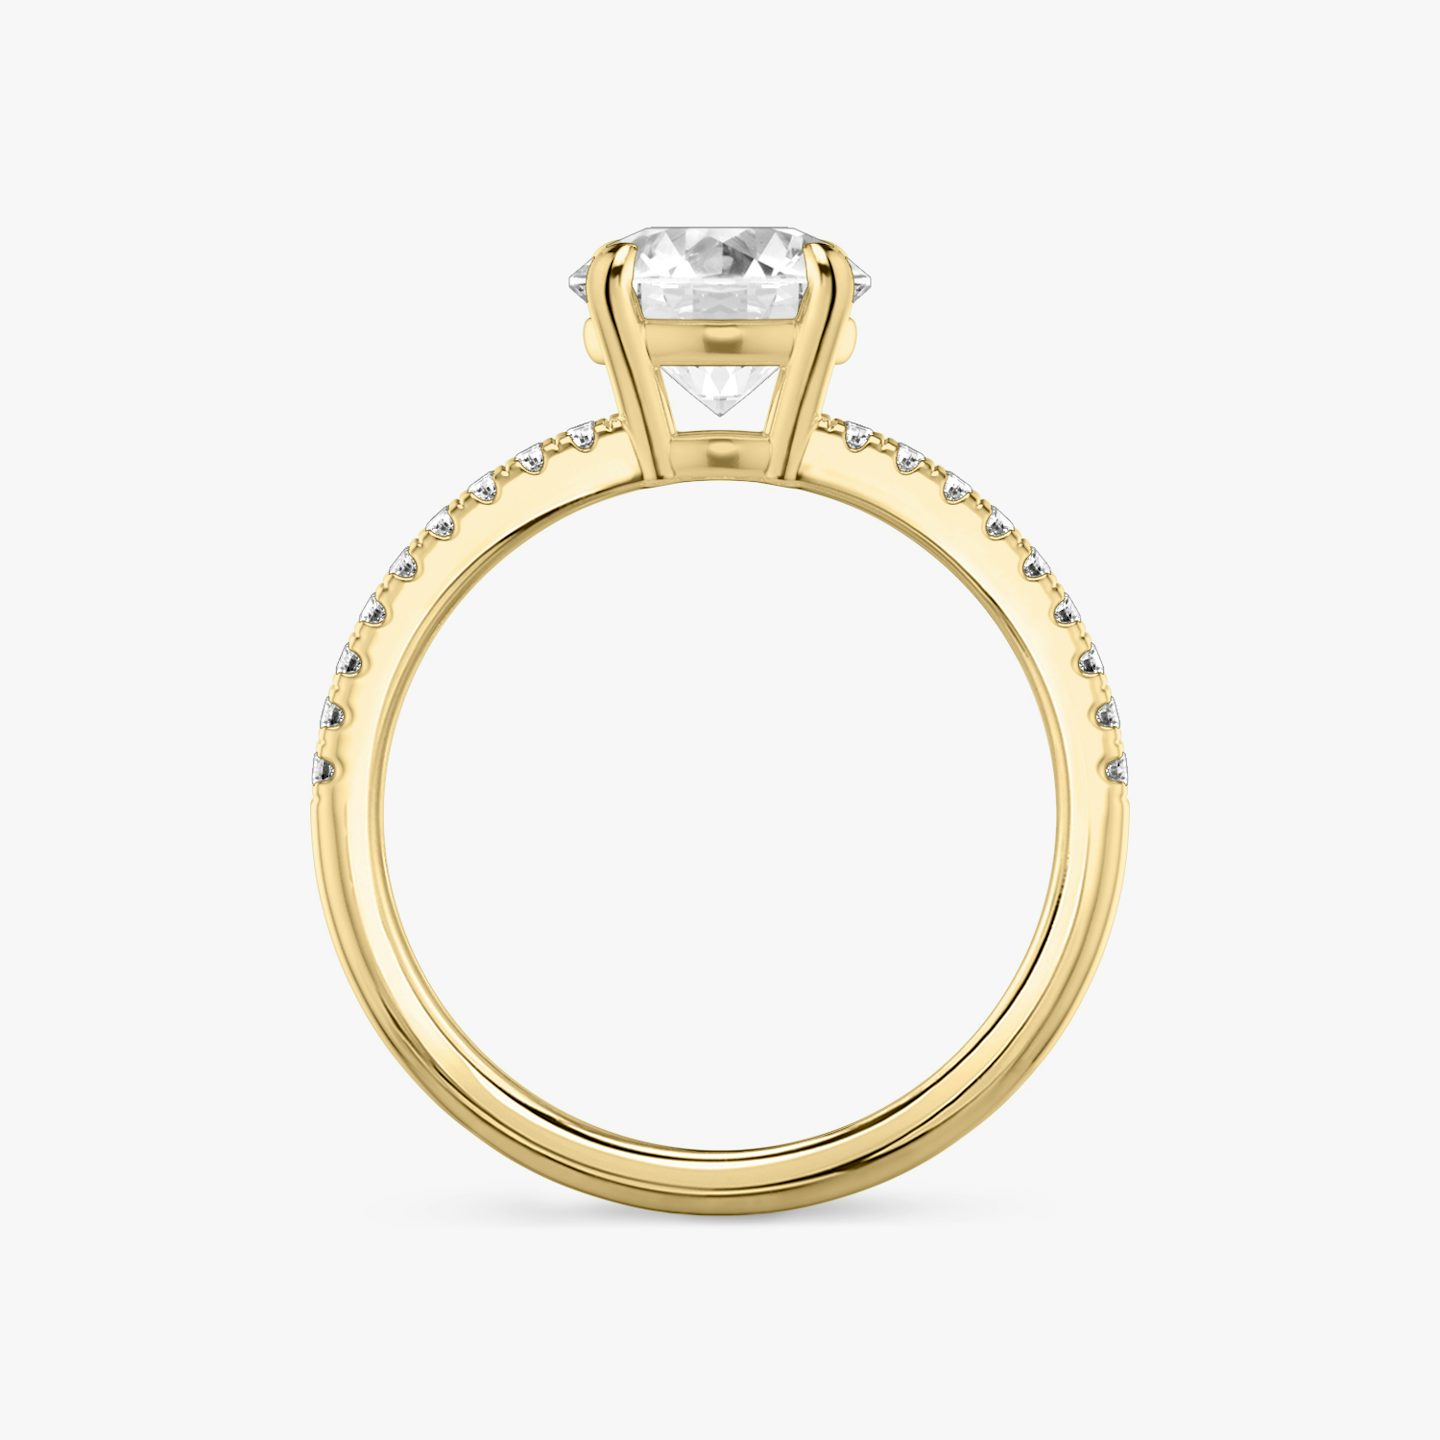 The Double Band | Round Brilliant | 18k | 18k Yellow Gold | Band: Pavé | Carat weight: 2 | Band stone shape: Round Brilliant | Diamond orientation: vertical